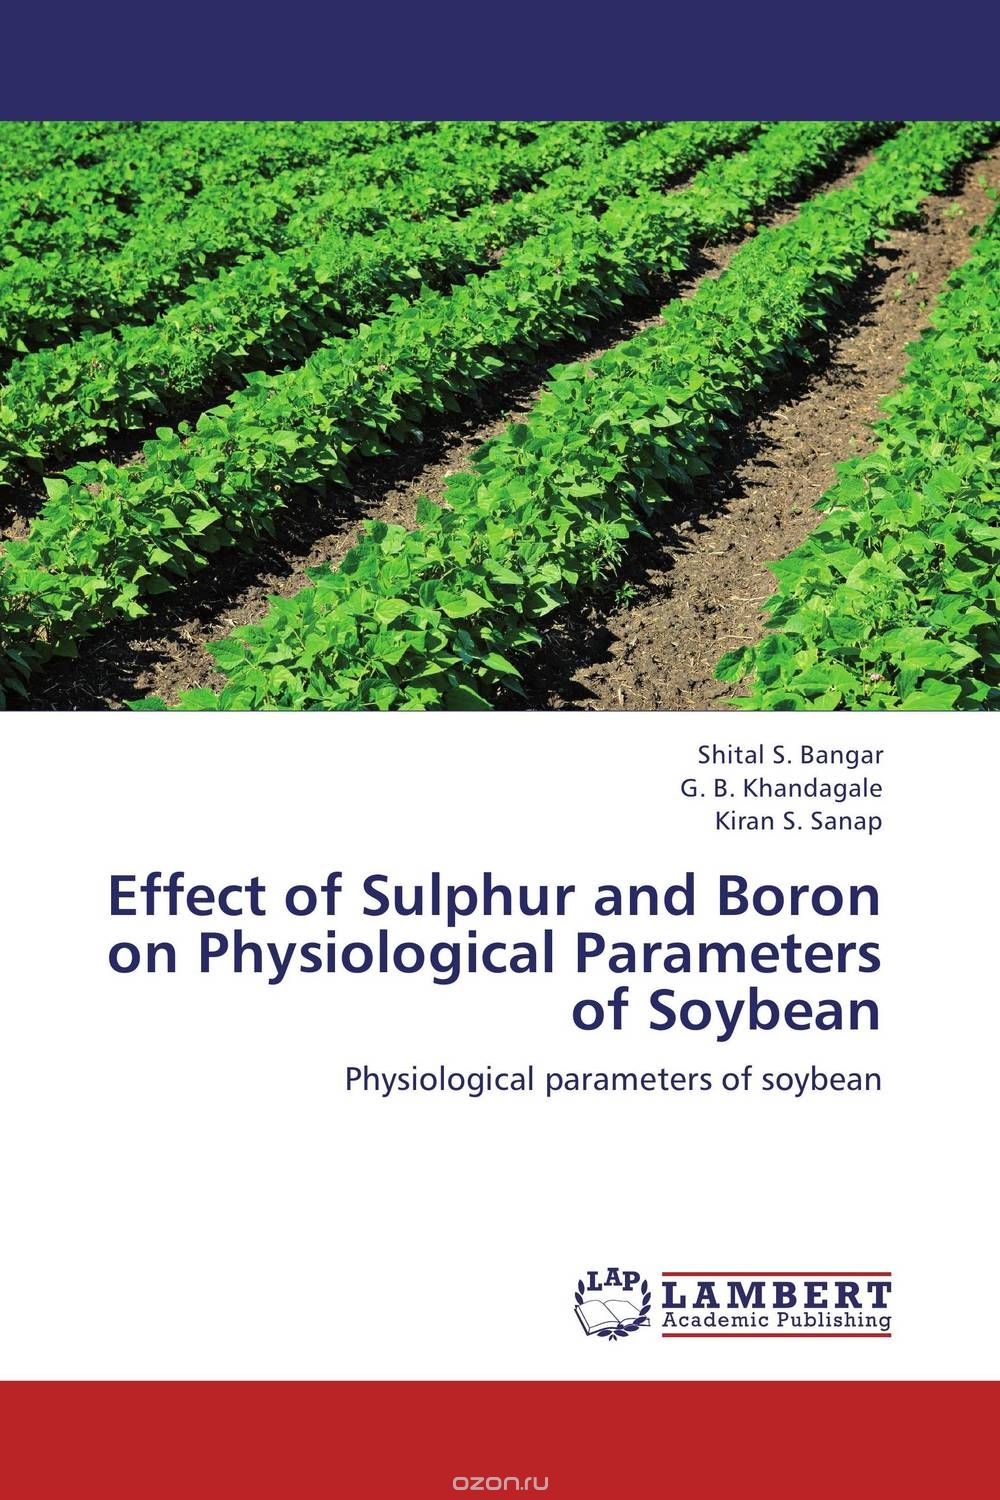 Effect of Sulphur and Boron on Physiological Parameters of Soybean